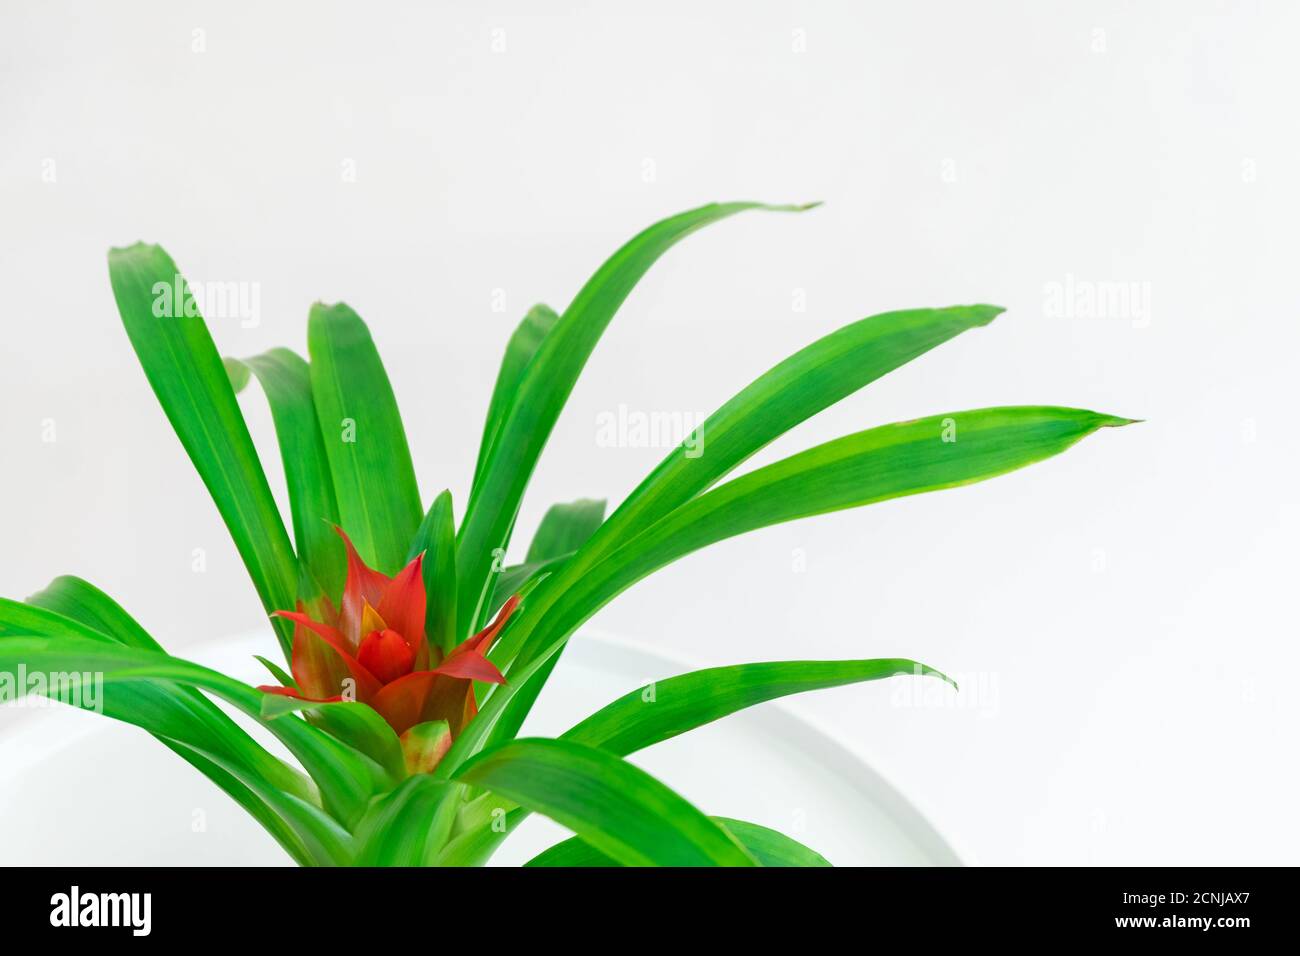 Closeup image of Guzmania plant with red flower on white neutral background Stock Photo